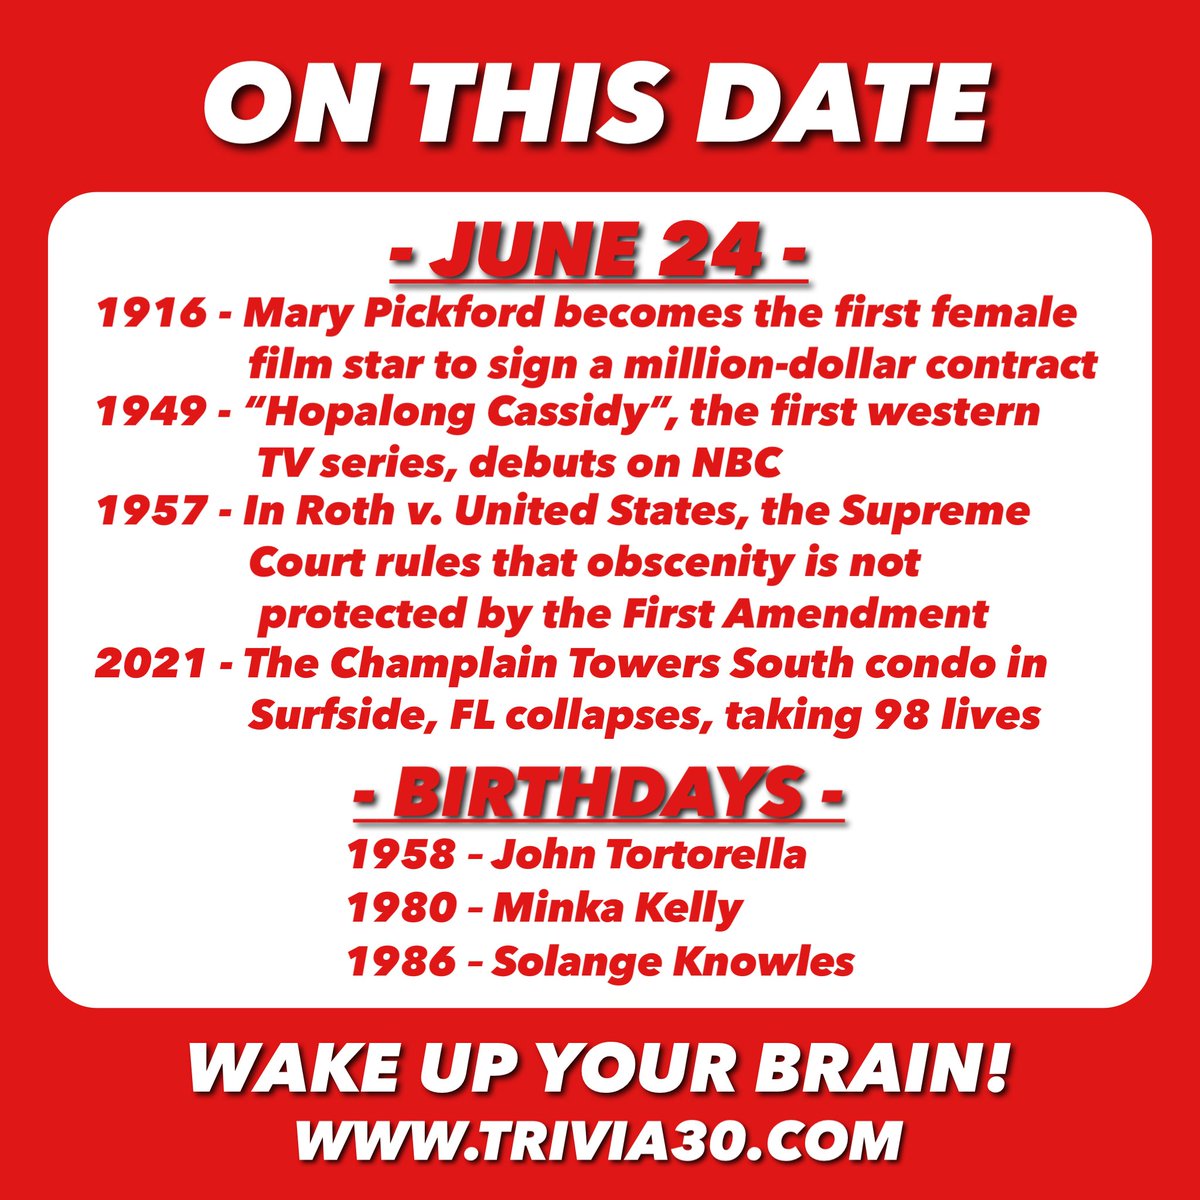 Your OTD trivia for 6/24... Join us for trivia tonight at Dicks Wings, and have a great Saturday! #TRIVIA30 #WakeUpYourBrain #OnThisDay #SirFrancisDrake #California #StatueOfLiberty #NYC #Iceland #Denmark #juneteenth2022 #Juneteenth #MLK #ToryBurch #VenusWilliams #KendrickLamar